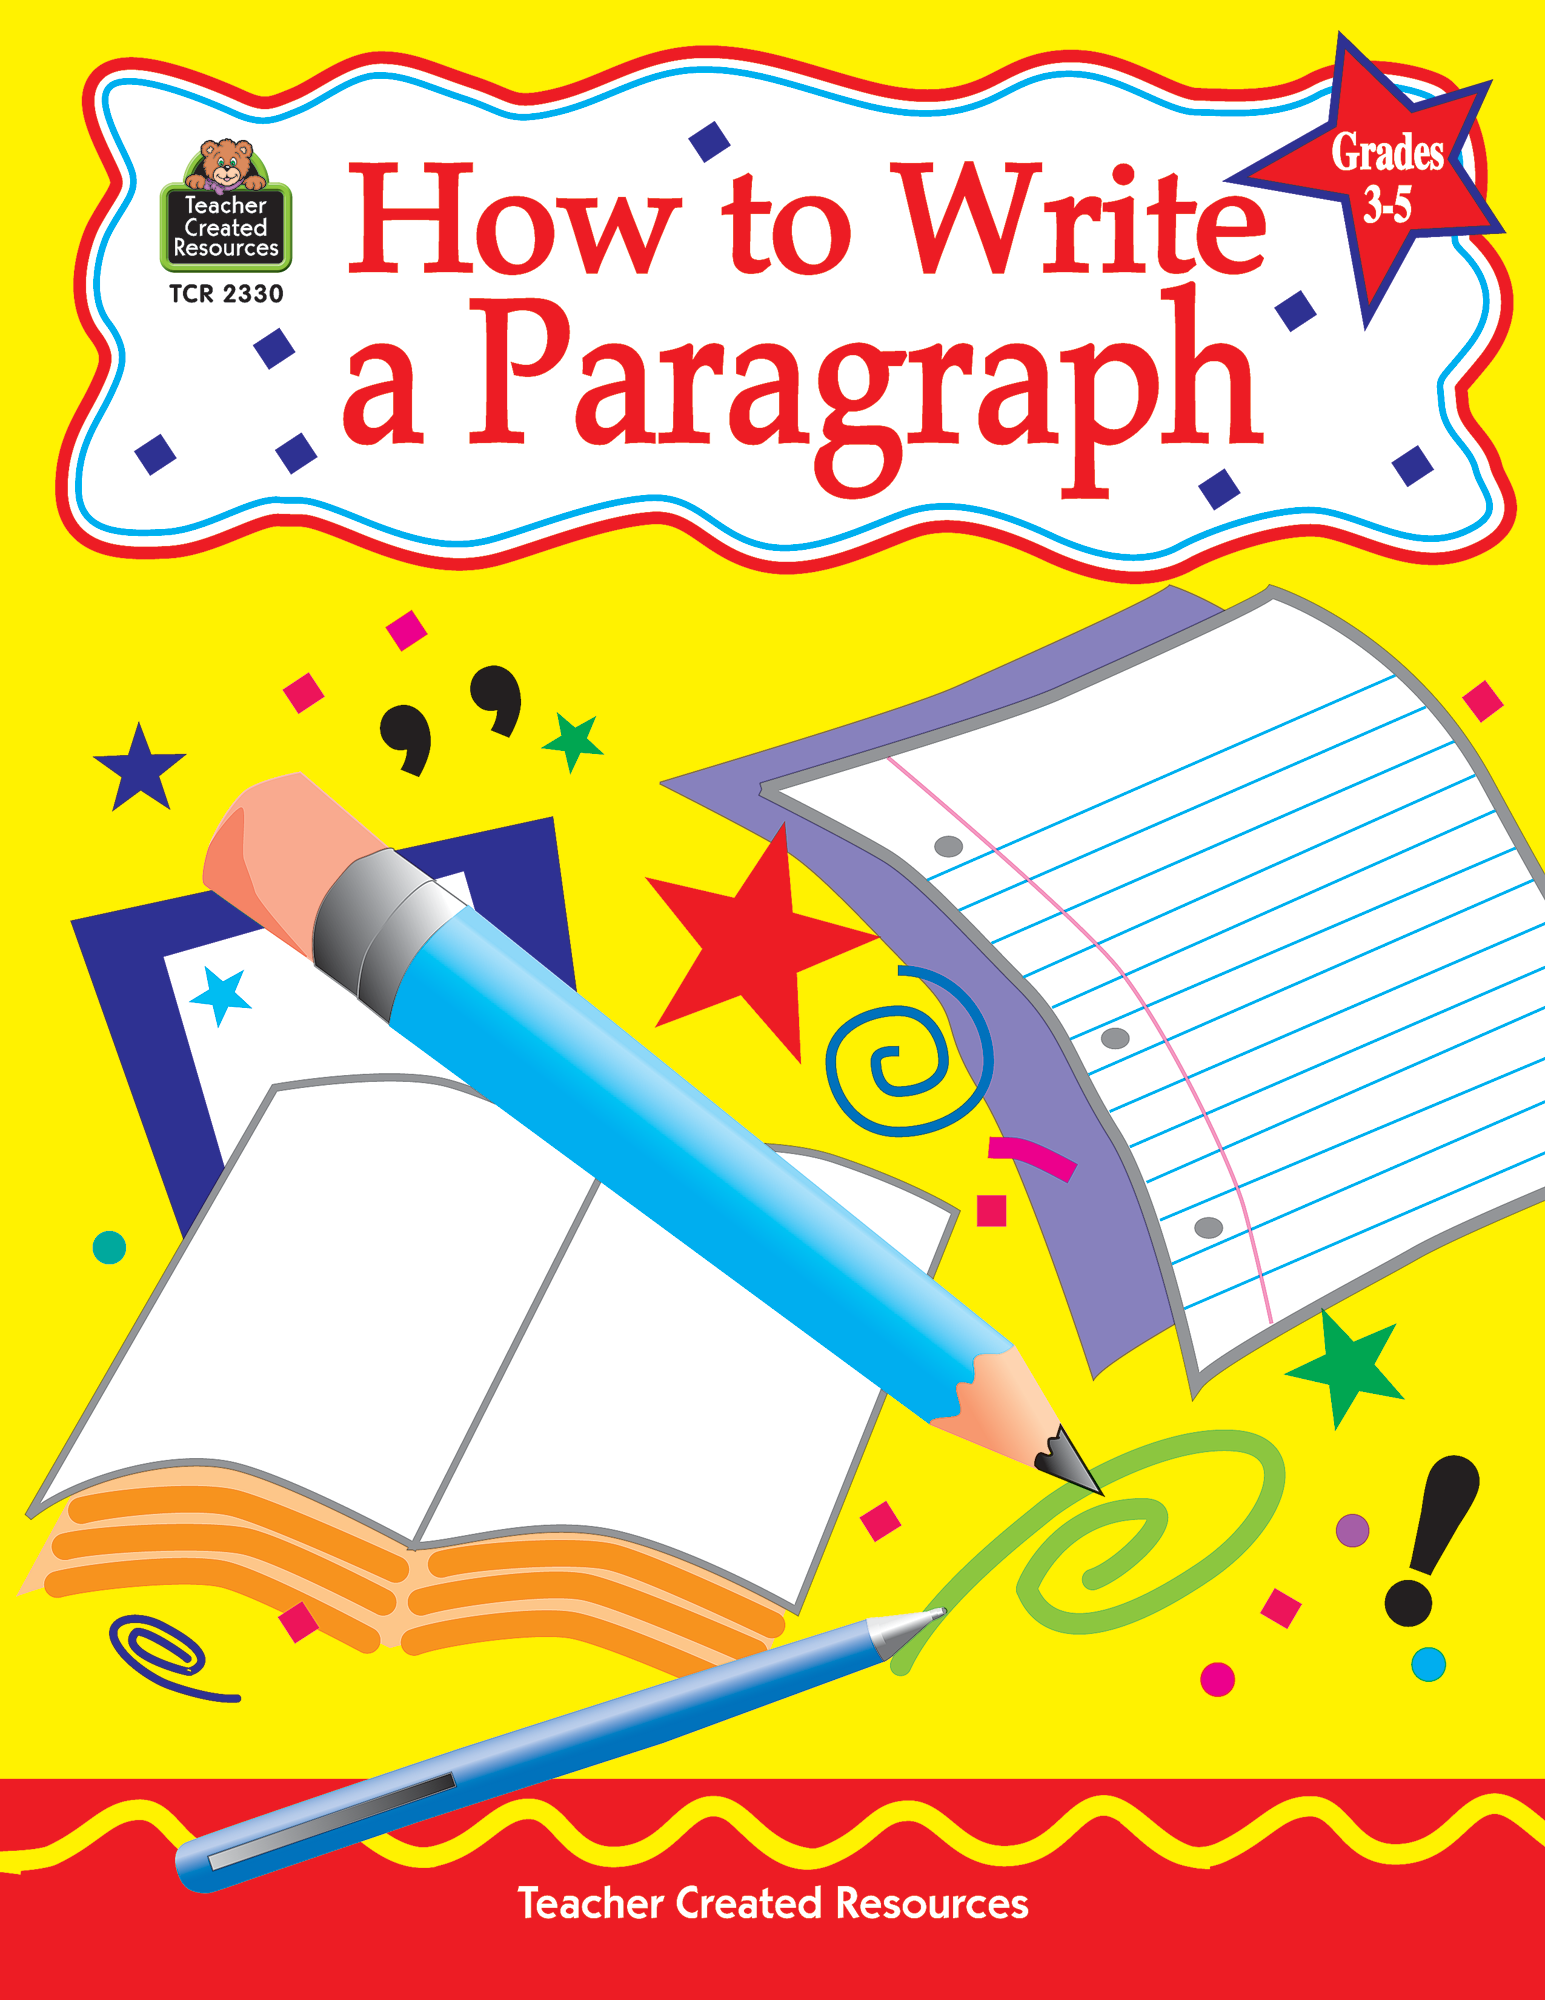 how-to-write-a-paragraph-grades-3-5-tcr2330-teacher-created-resources